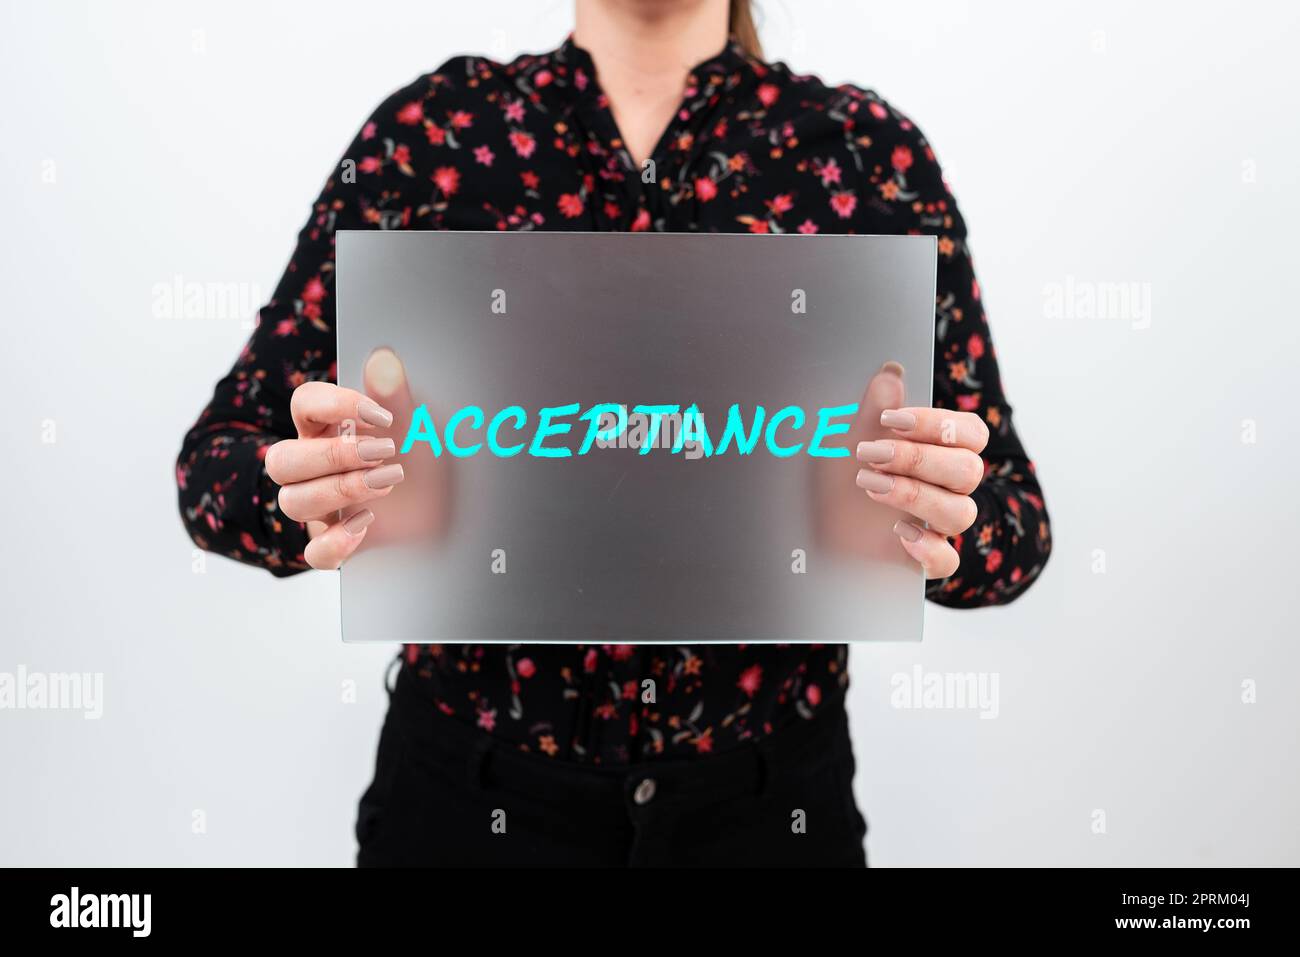 Text showing inspiration Acceptance, Business overview a condition or a person producing or showing no symptoms Woman Showing Placard And Presenting I Stock Photo